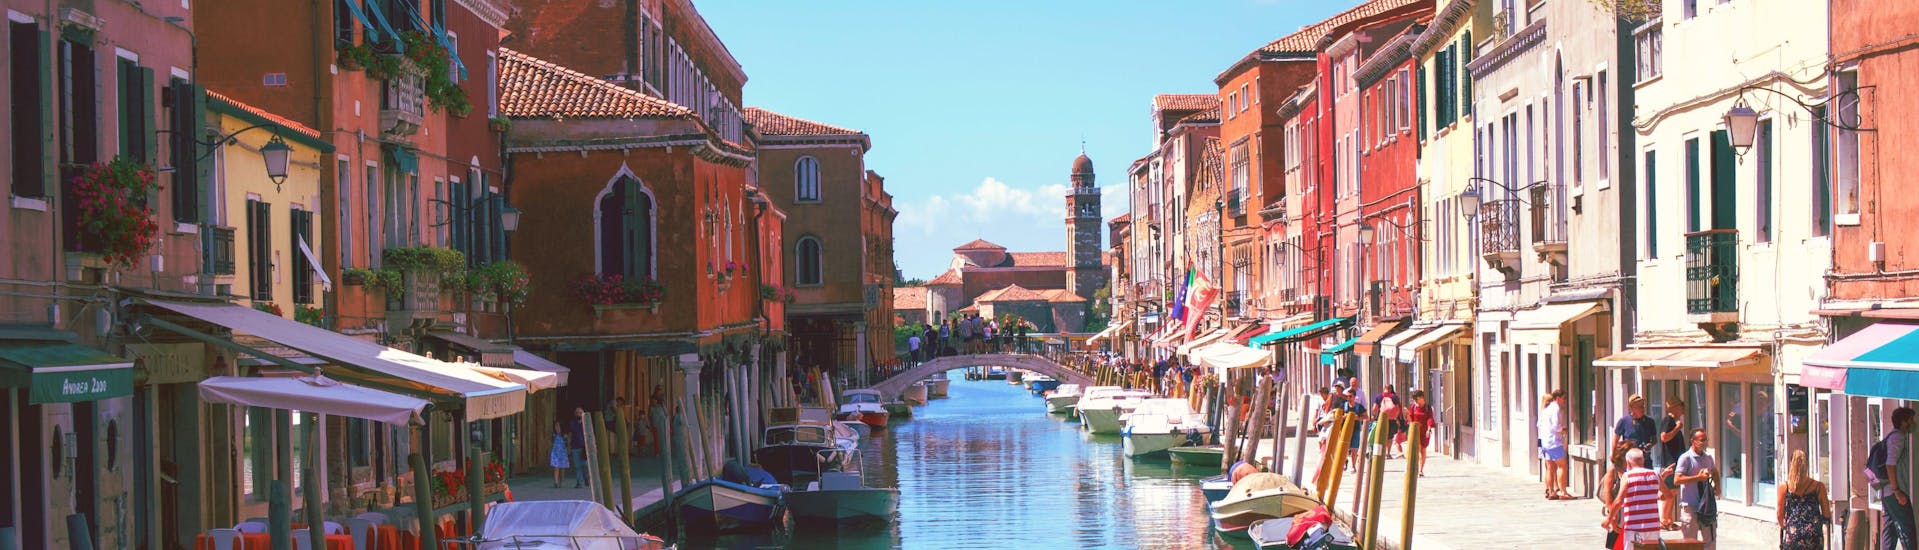 View of Burano, a small island close to Venice that you can reach with a boat trip.